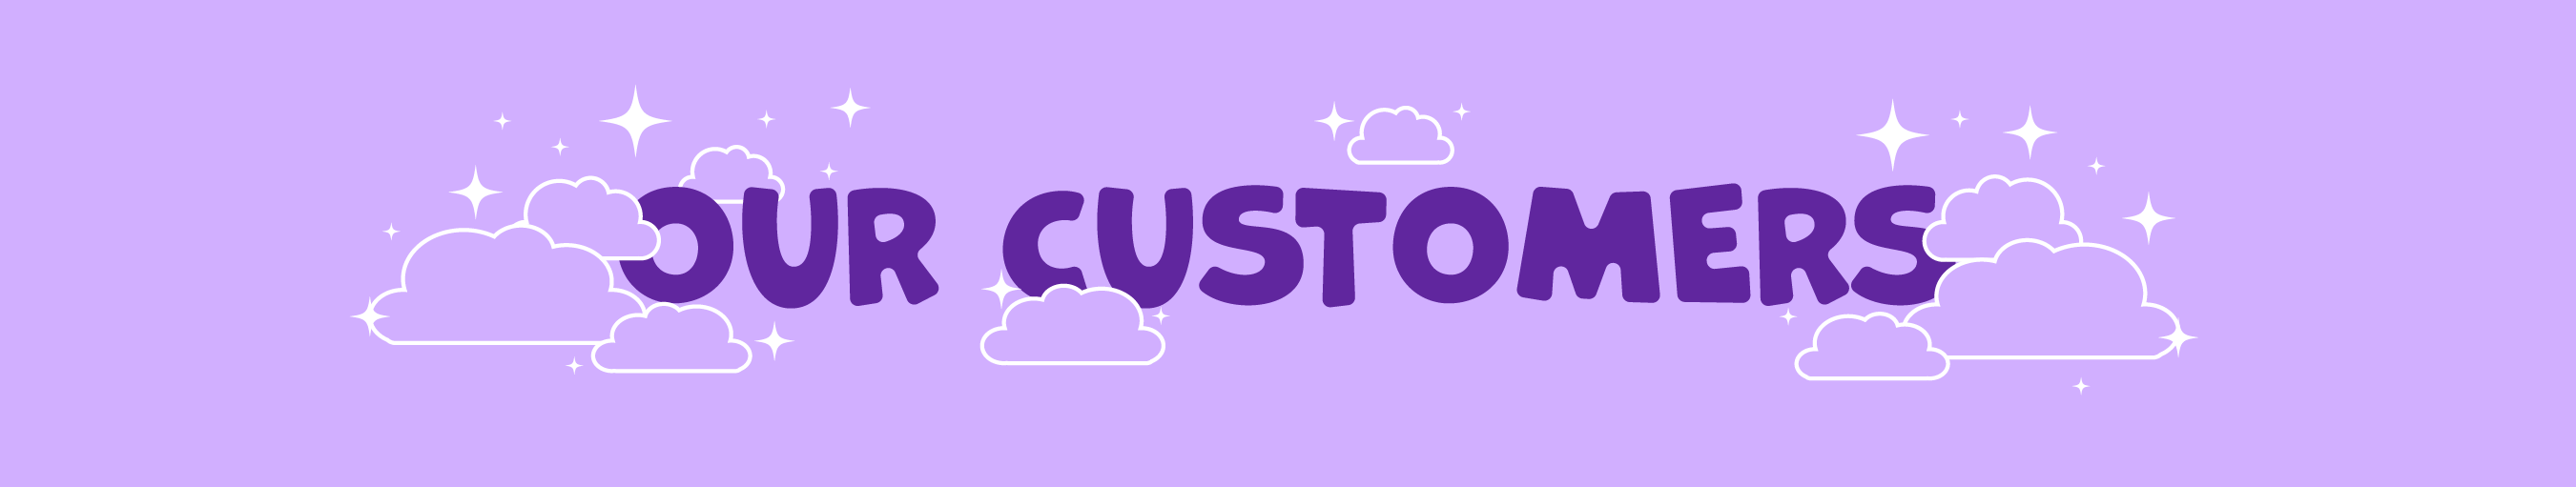 light purple background with white clouds and stars around purple text "Our Customers" in all caps.